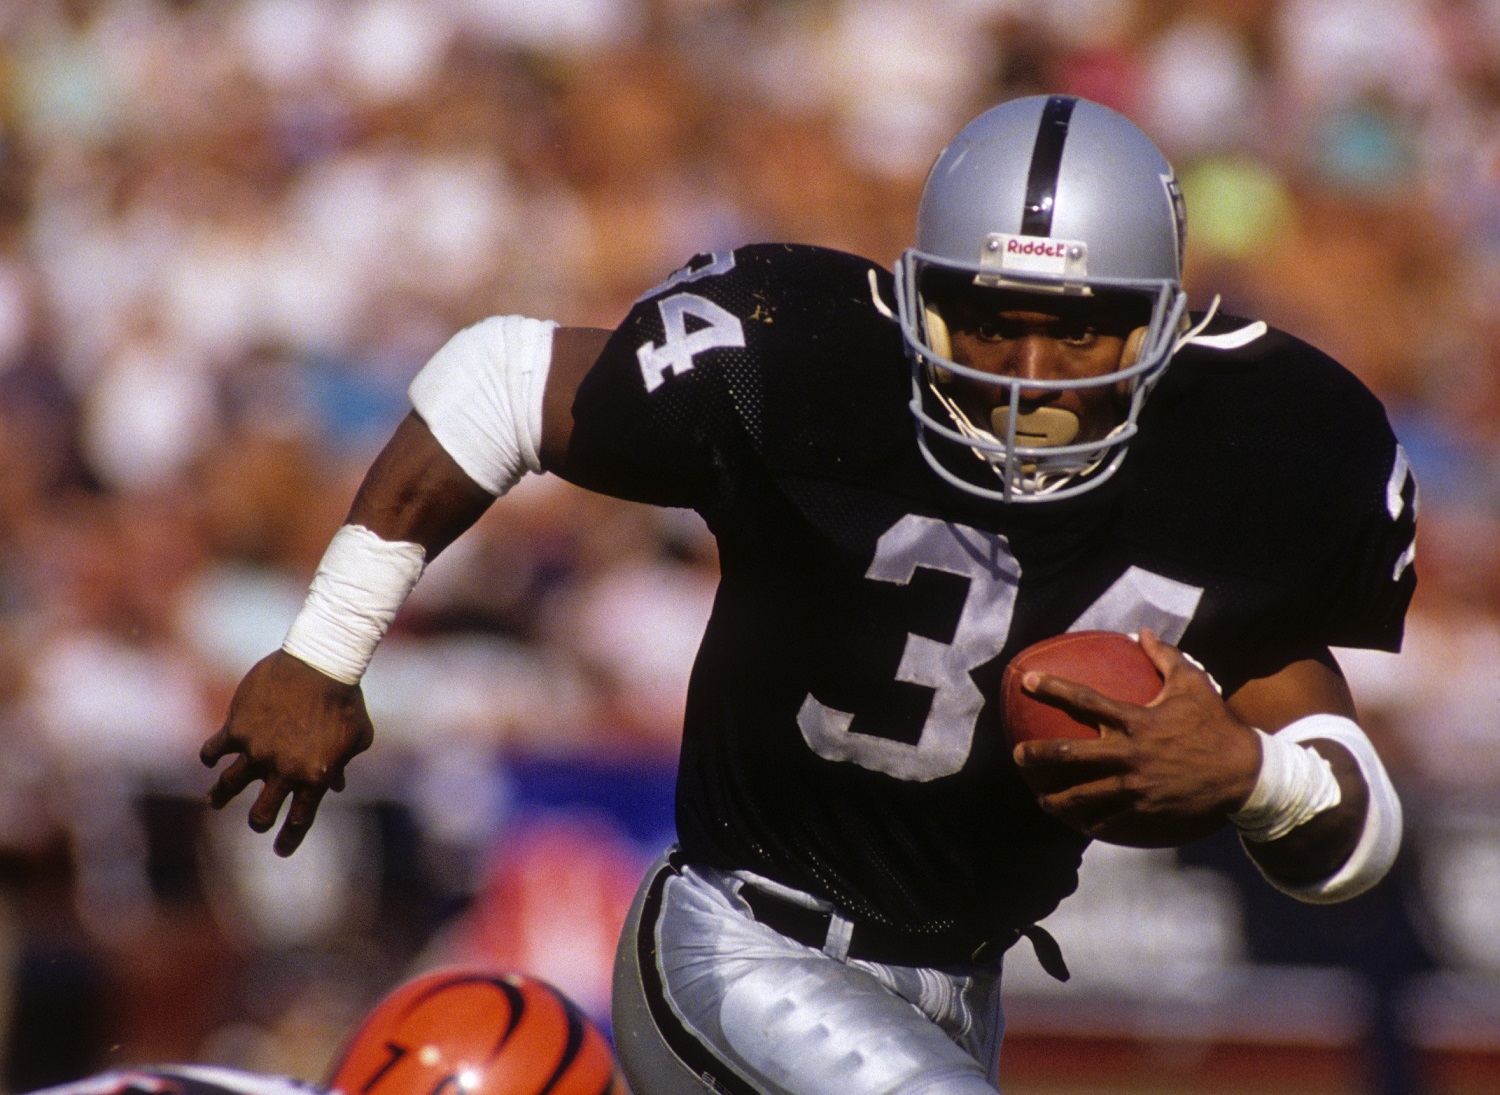 A hip injury limited Bo Jackson's impressive multi-sport career to four NFL seasons. | George Rose/Getty Images